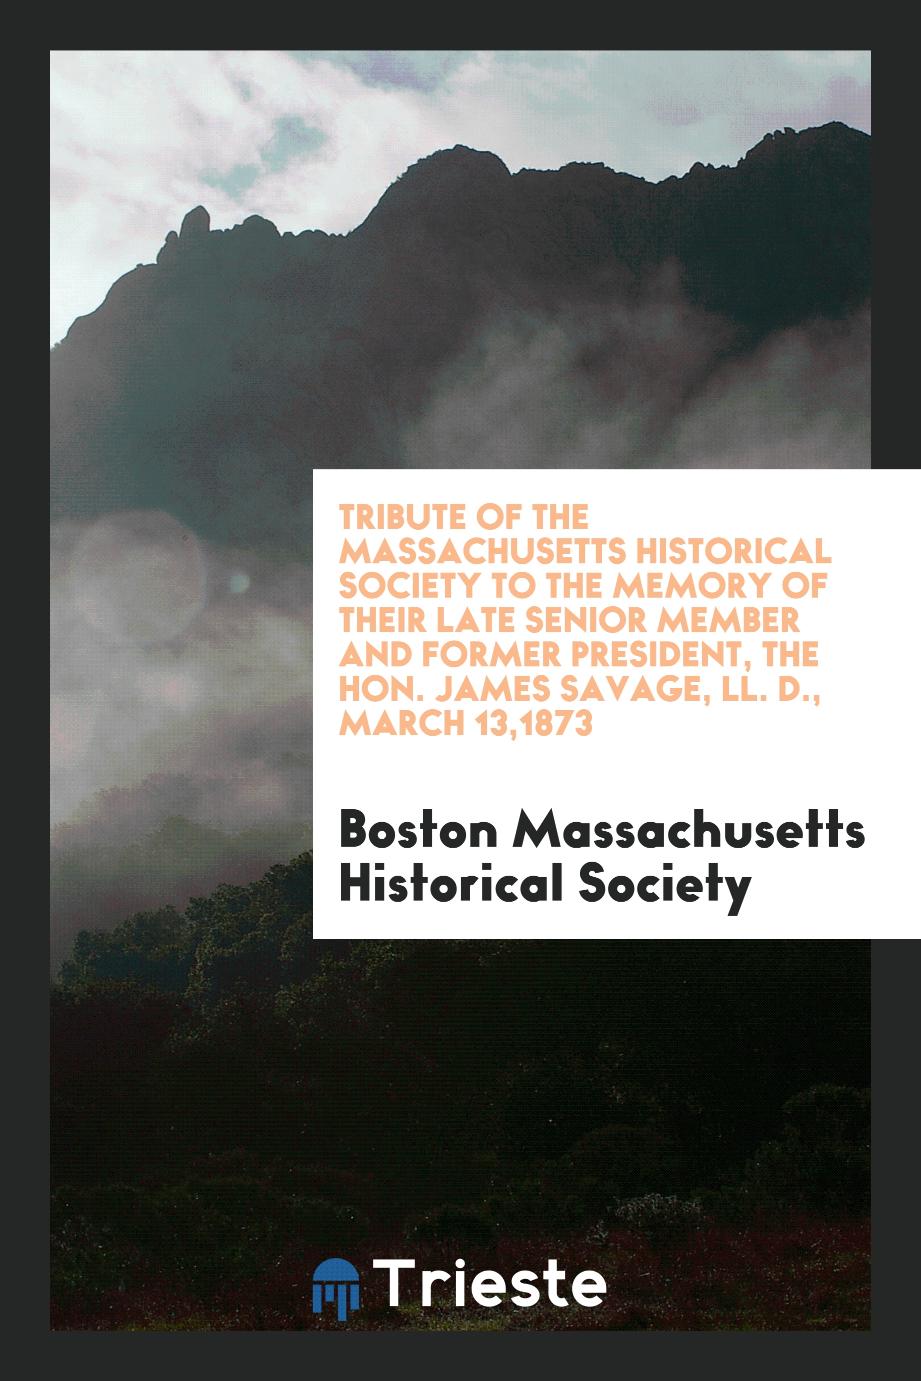 Tribute of the Massachusetts historical society to the memory of their late senior member and former president, the Hon. James Savage, LL. D., March 13,1873